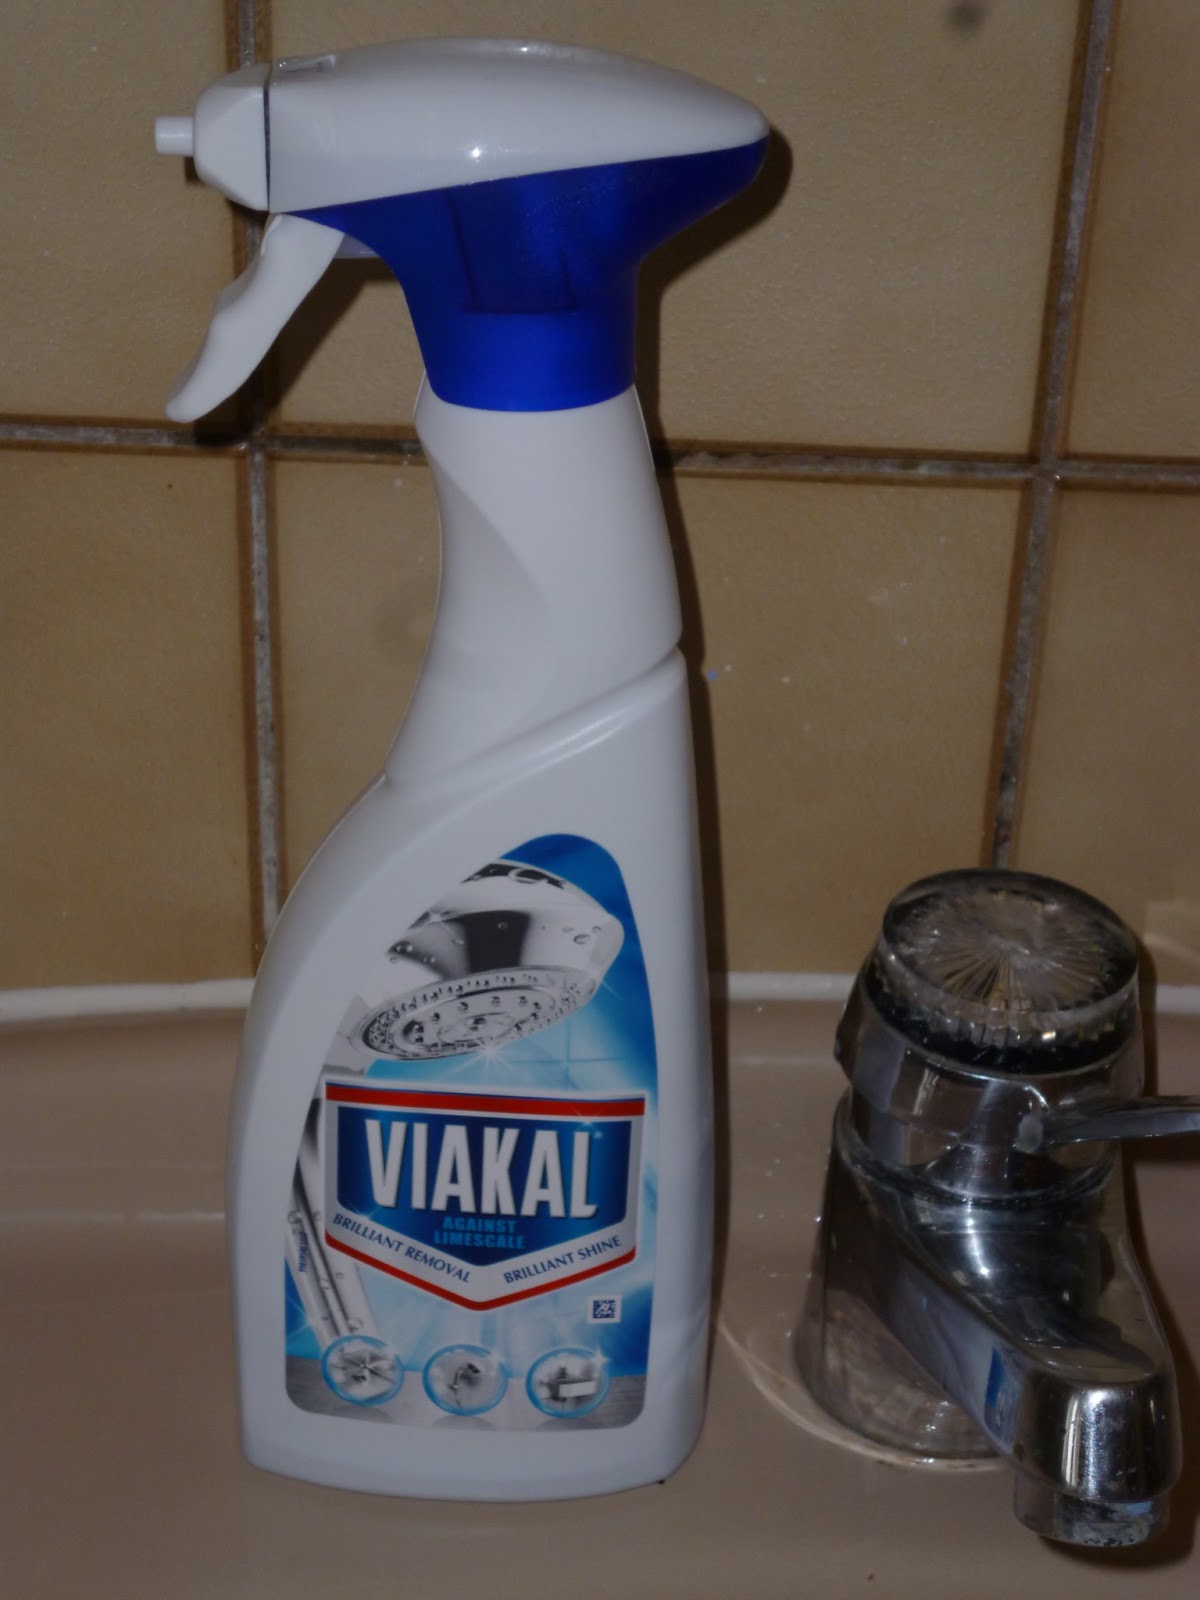 Madhouse Family Reviews: Viakal Limescale Remover review